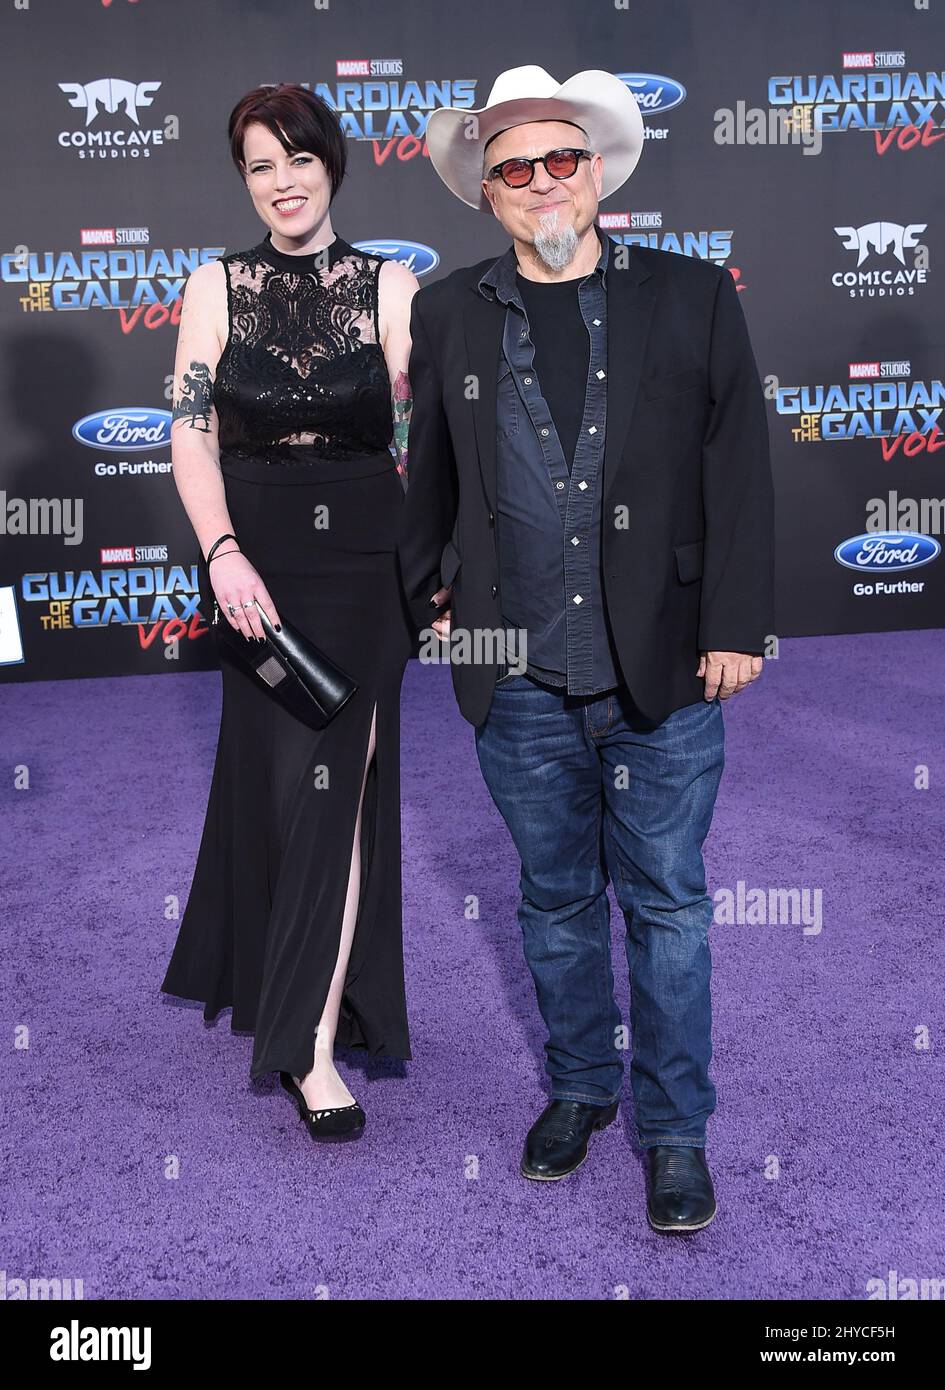 Bobcat Goldthwait and Nora Muhlenfeld attending the world premiere of Guardians of the Galaxy Vol. 2 in Los Angeles Stock Photo